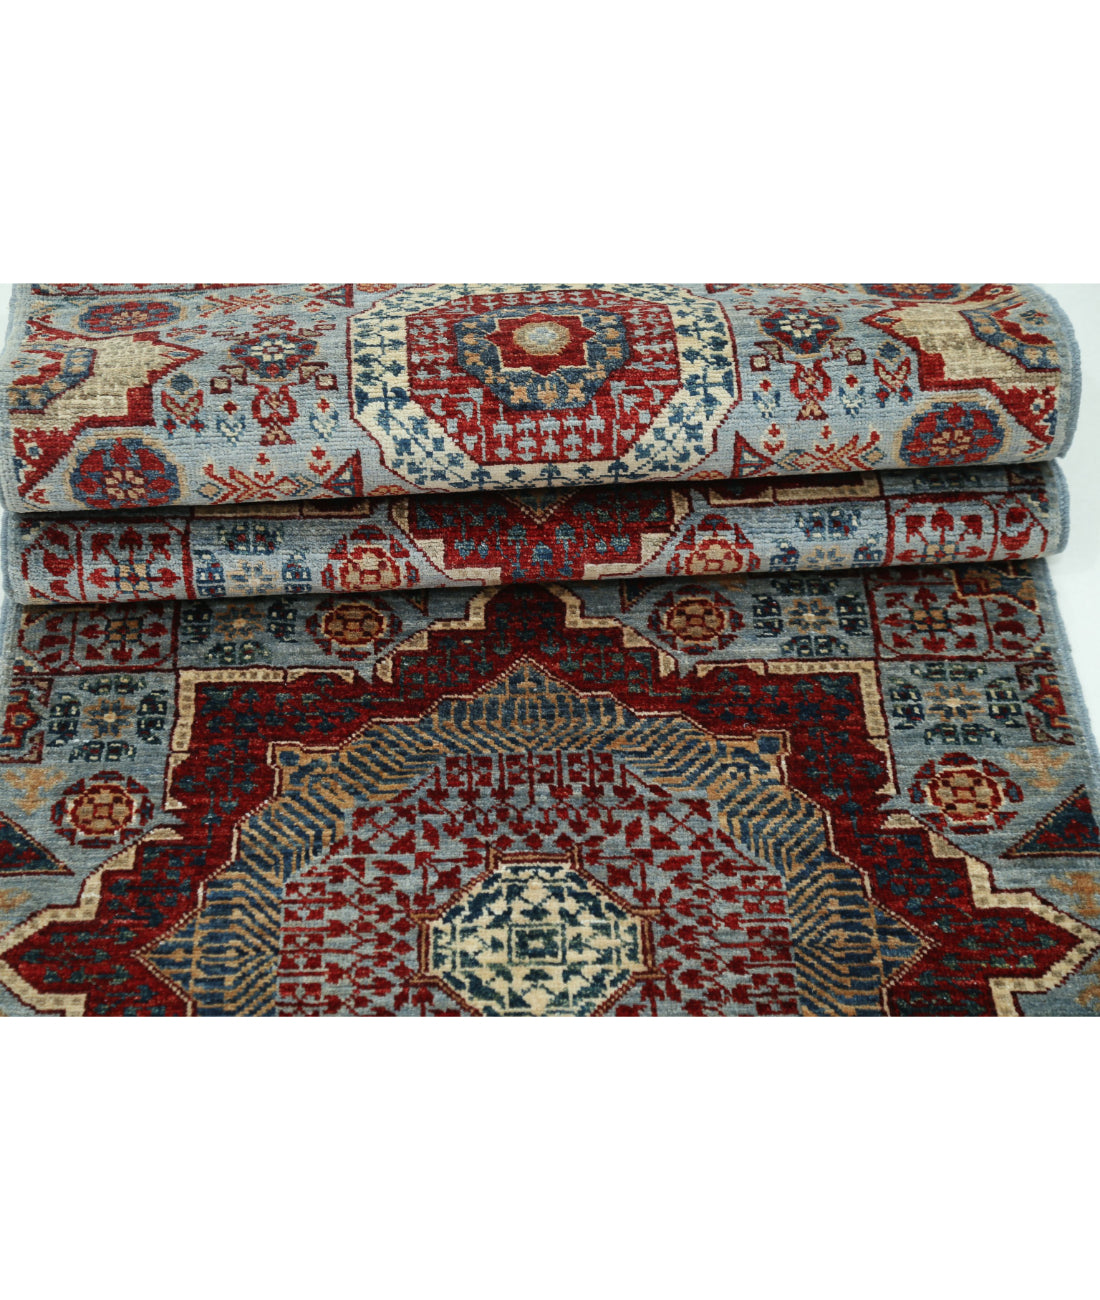 Mamluk 2'5'' X 9'8'' Hand-Knotted Wool Rug 2'5'' x 9'8'' (73 X 290) / Blue / Red